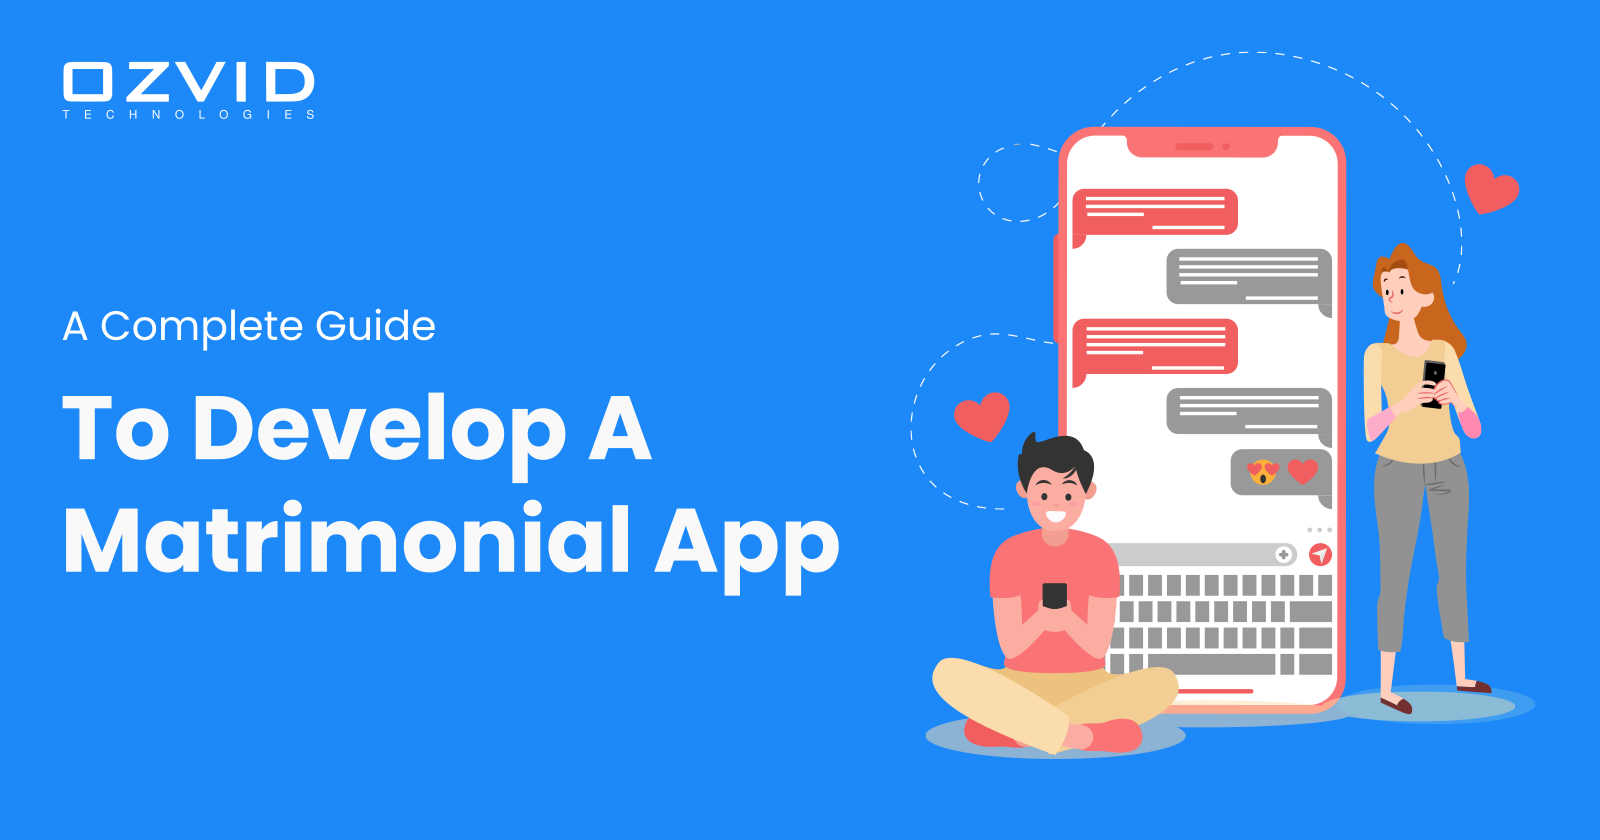 A Complete Guide To Develop A Matrimonial App